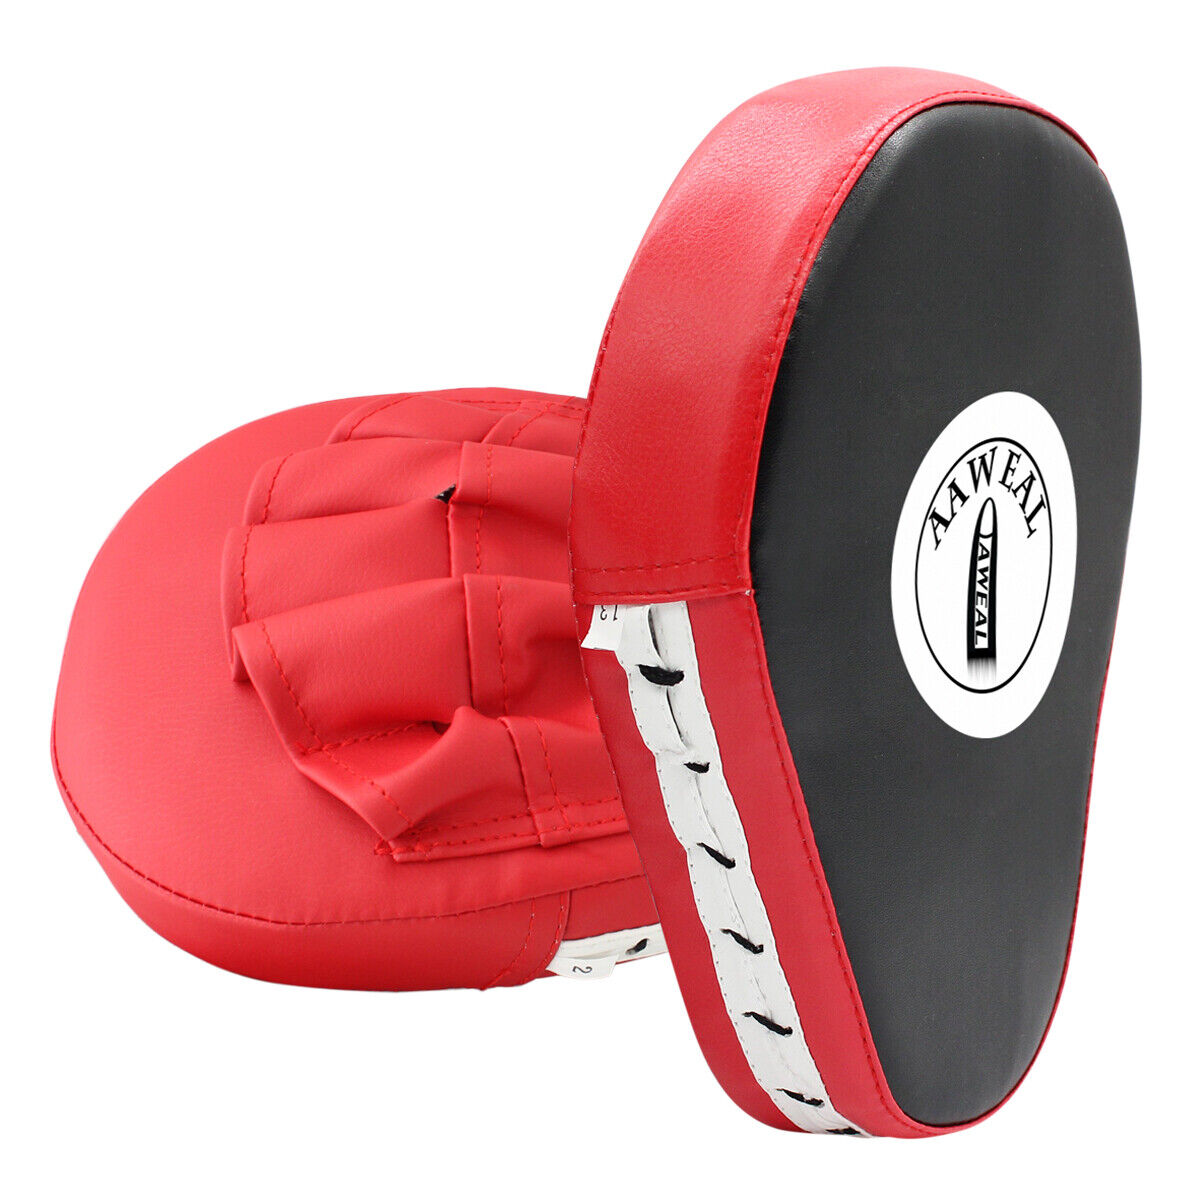 Aaweal Boxing Pads Focus Mitts Curved MMA Training Muay Thai Pad Punching Gloves Aaweal Does Not Apply - фотография #5